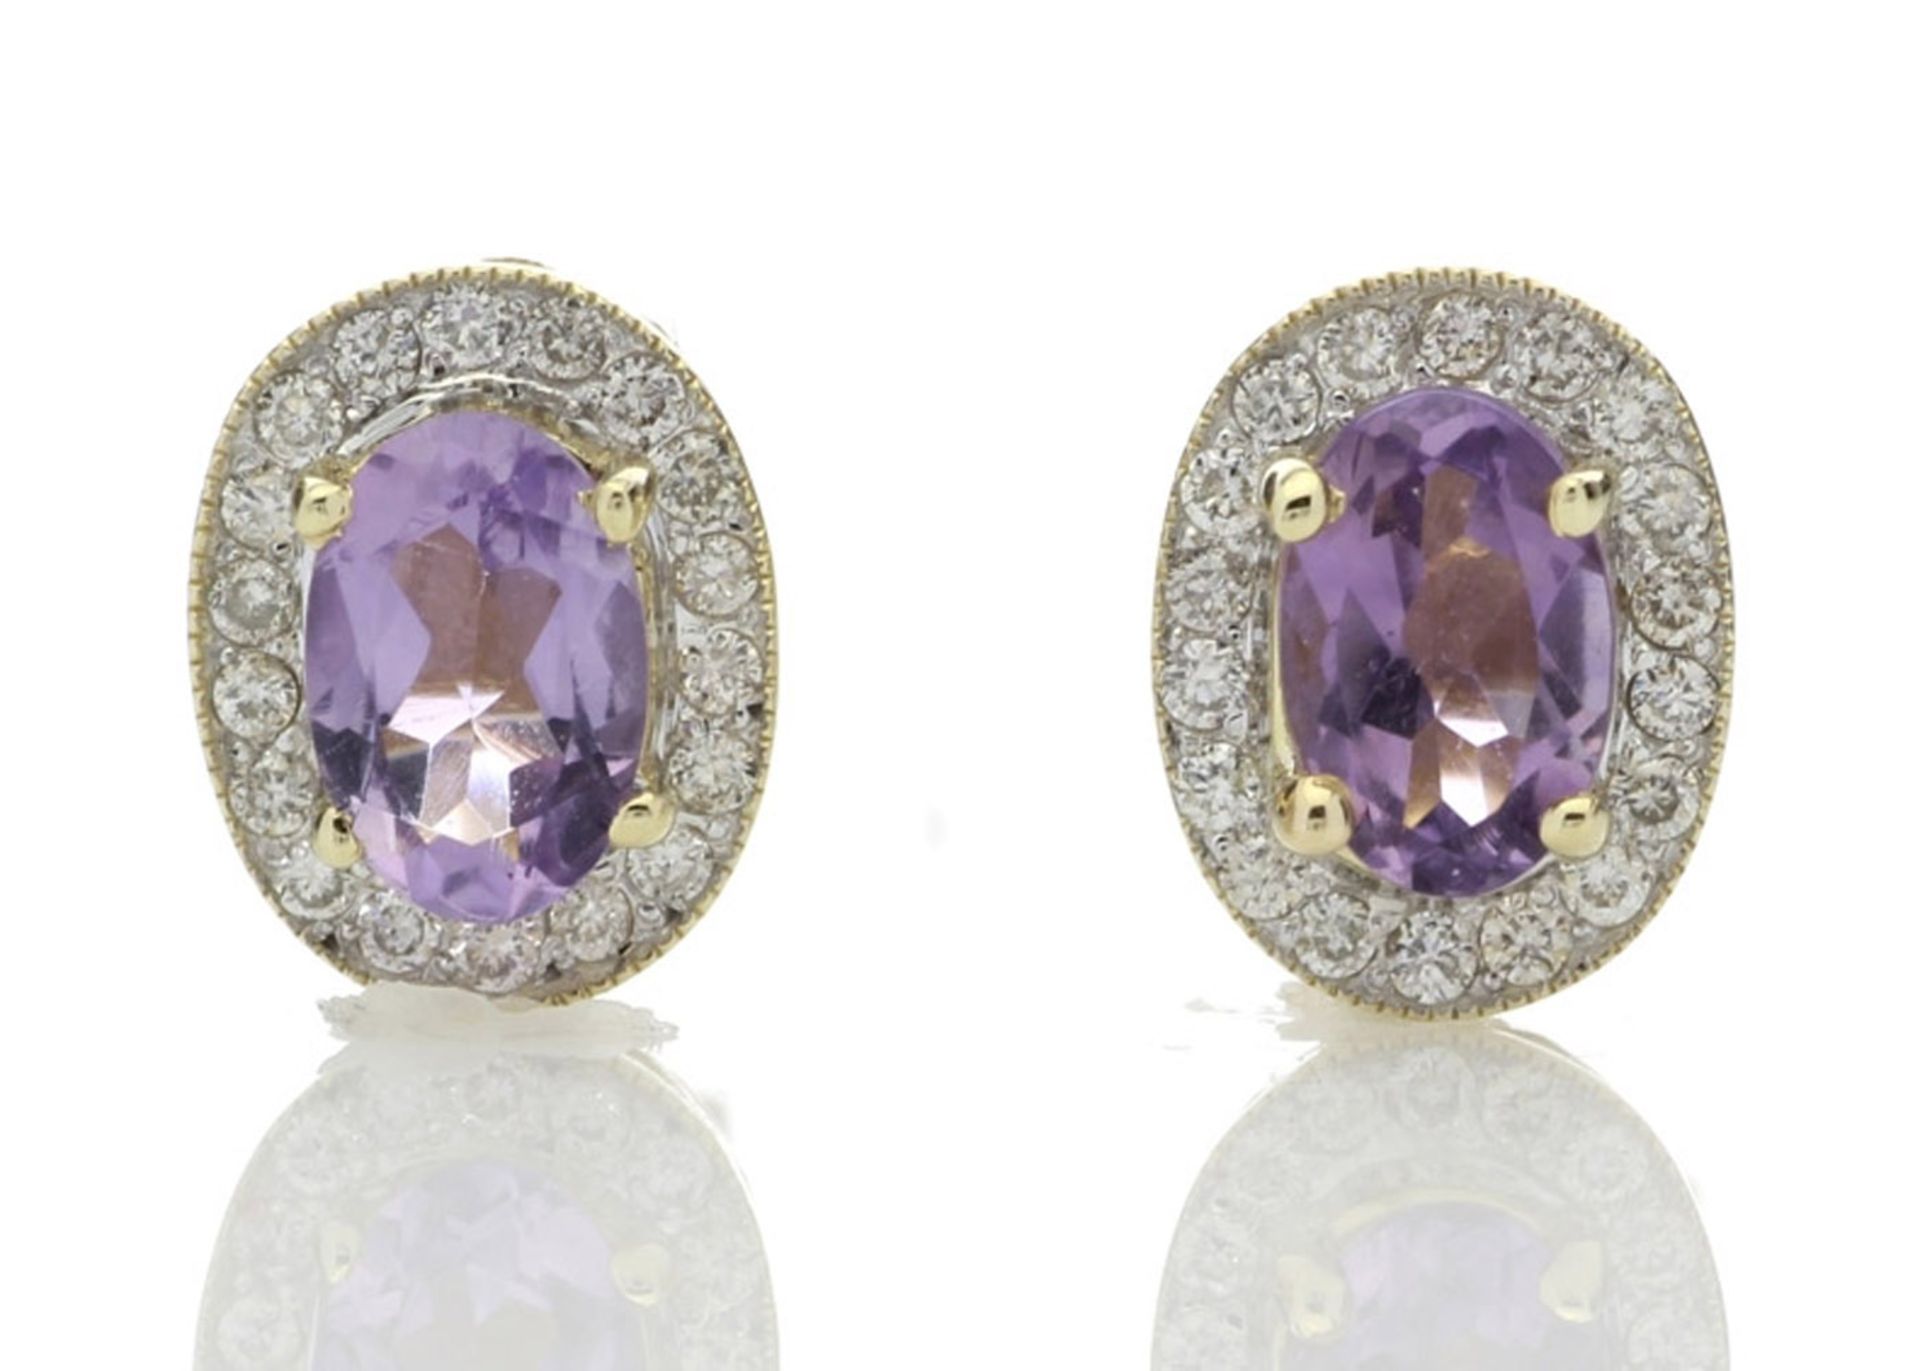 9ct Yellow Gold Amethyst and Diamond Cluster Earring (A0.86) 0.18 Carats - Valued By GIE £2,855.00 - - Image 5 of 7